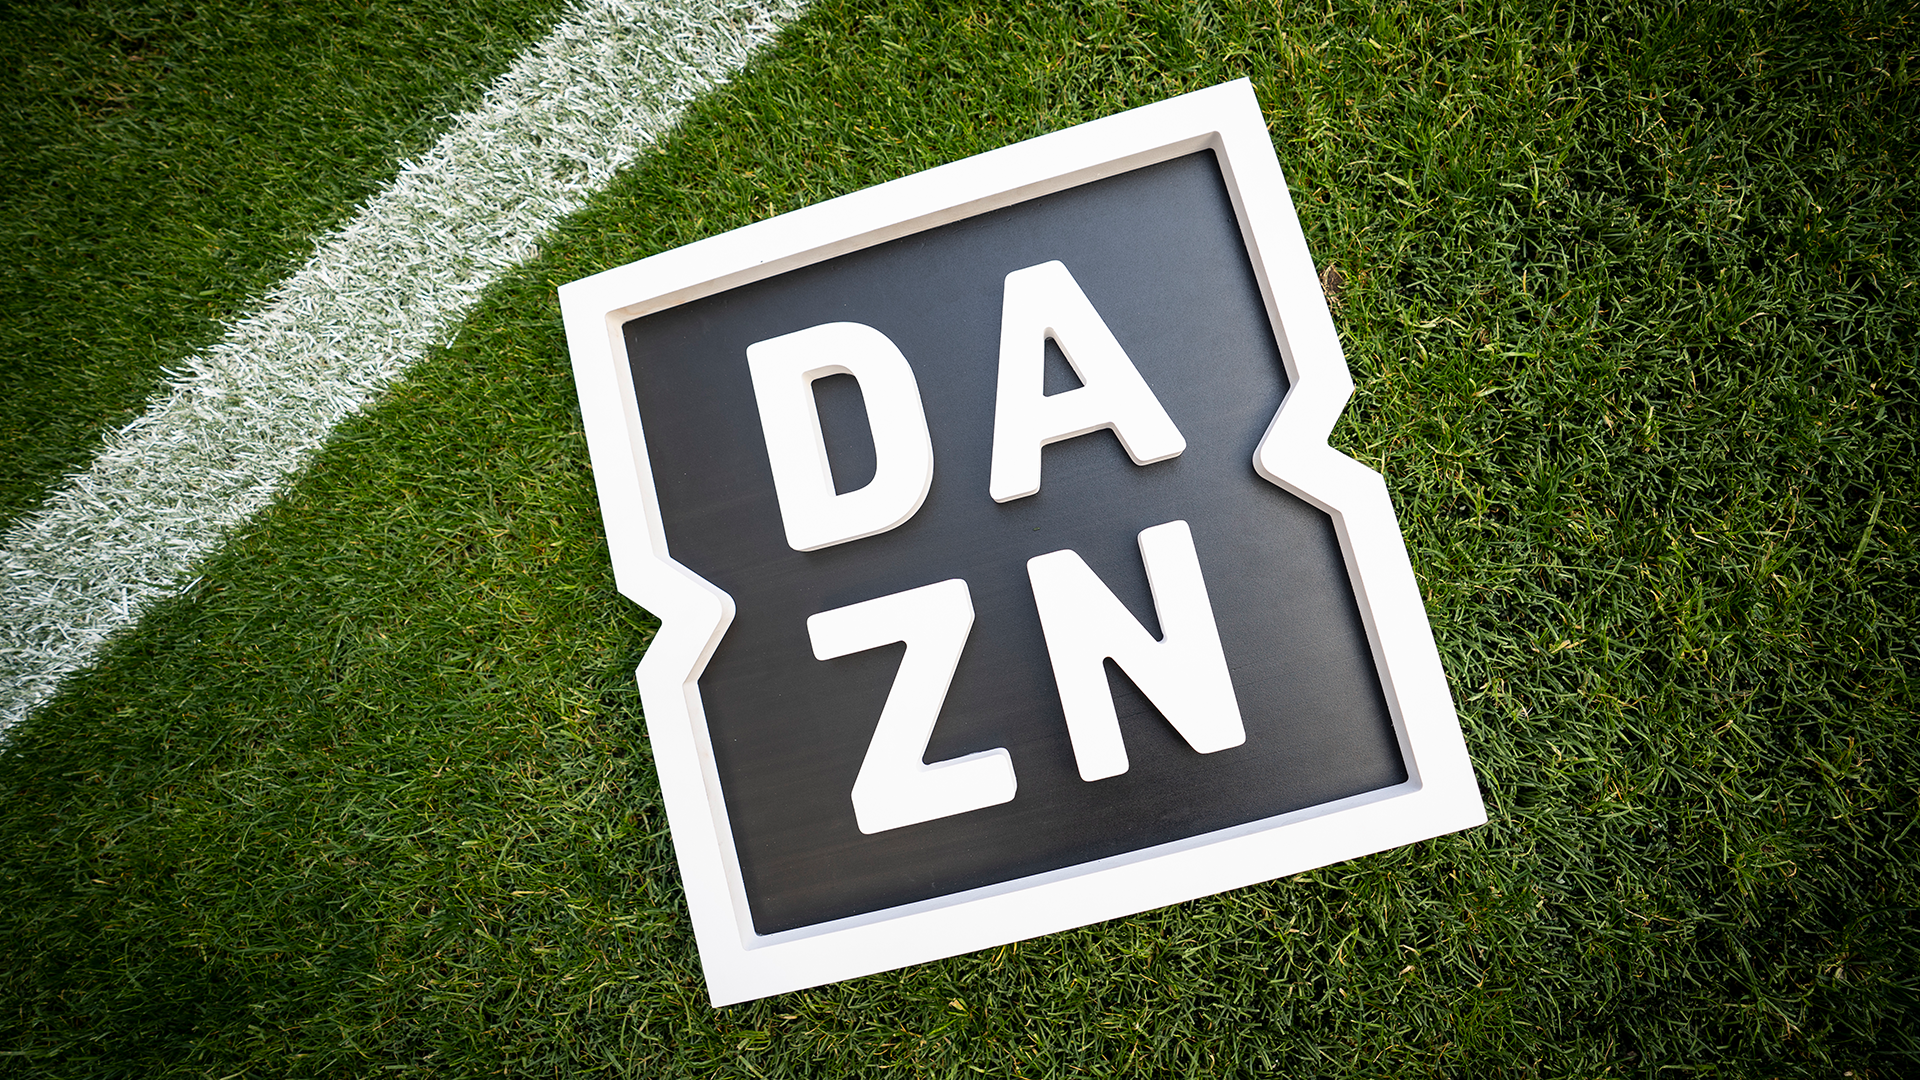 DAZN codes and prepaid cards, costs, where to buy and points of sale